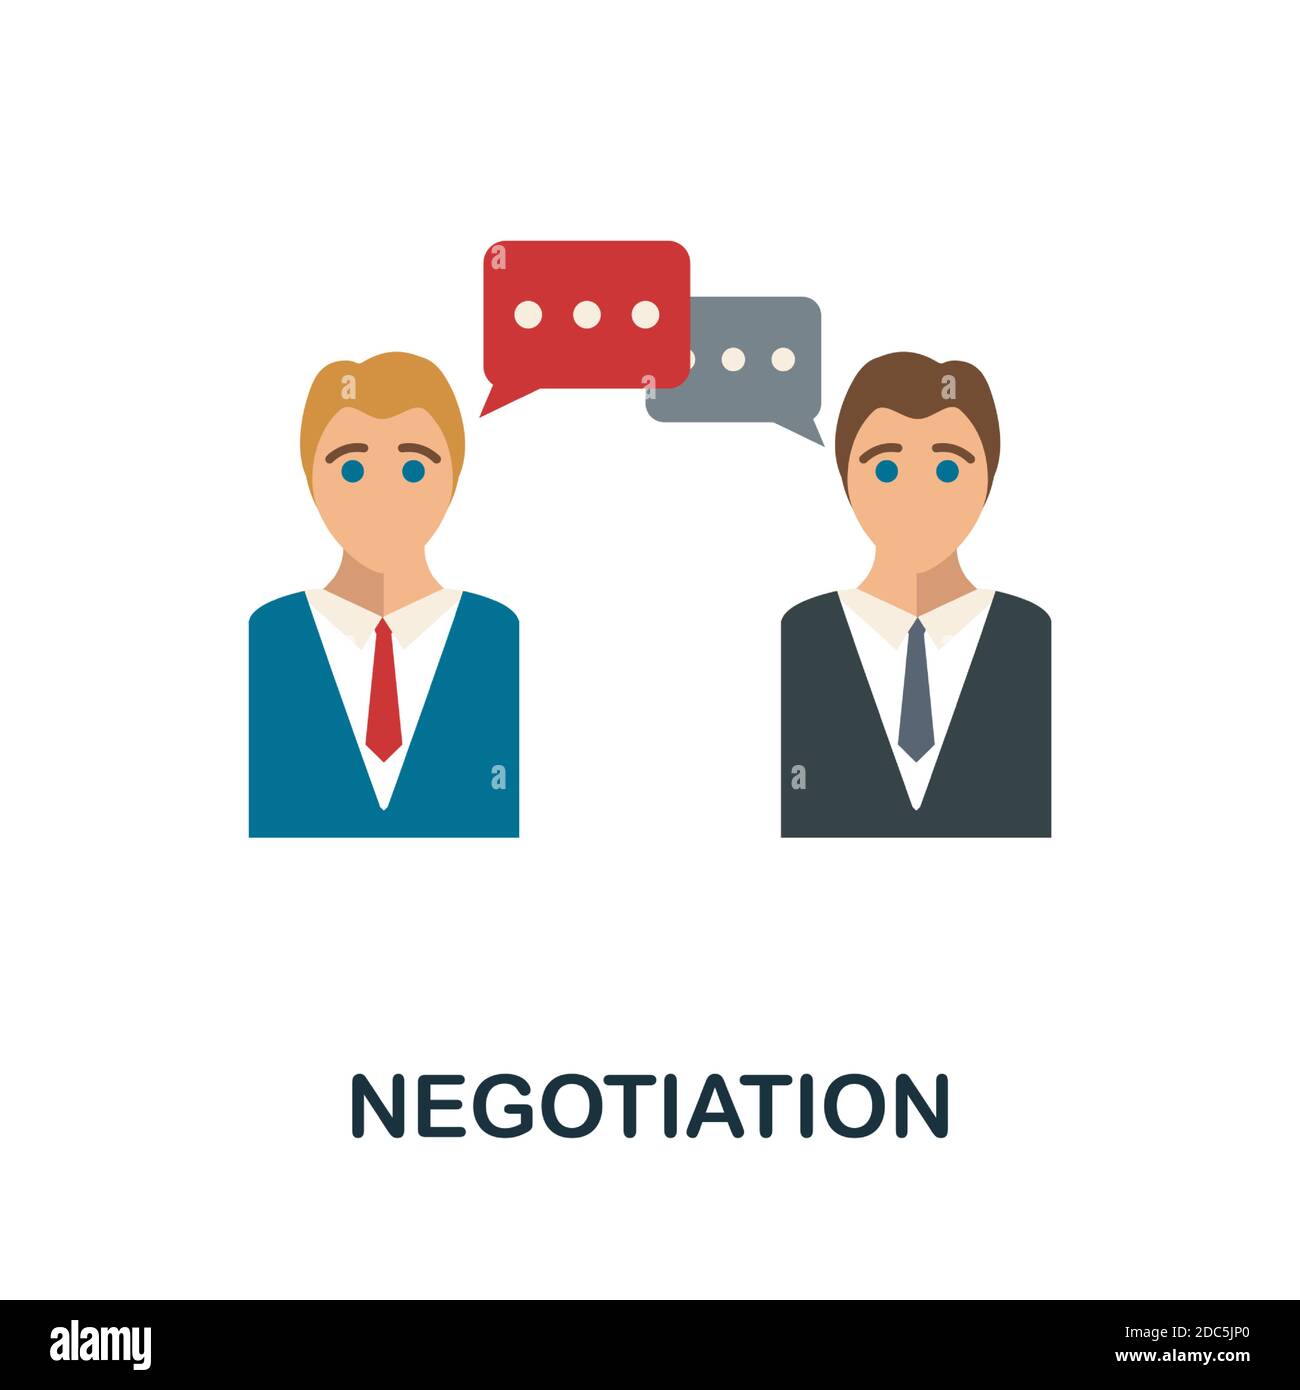 Negotiation Icon Simple Element From Human Resources Collection Creative Negotiation Icon For 9017